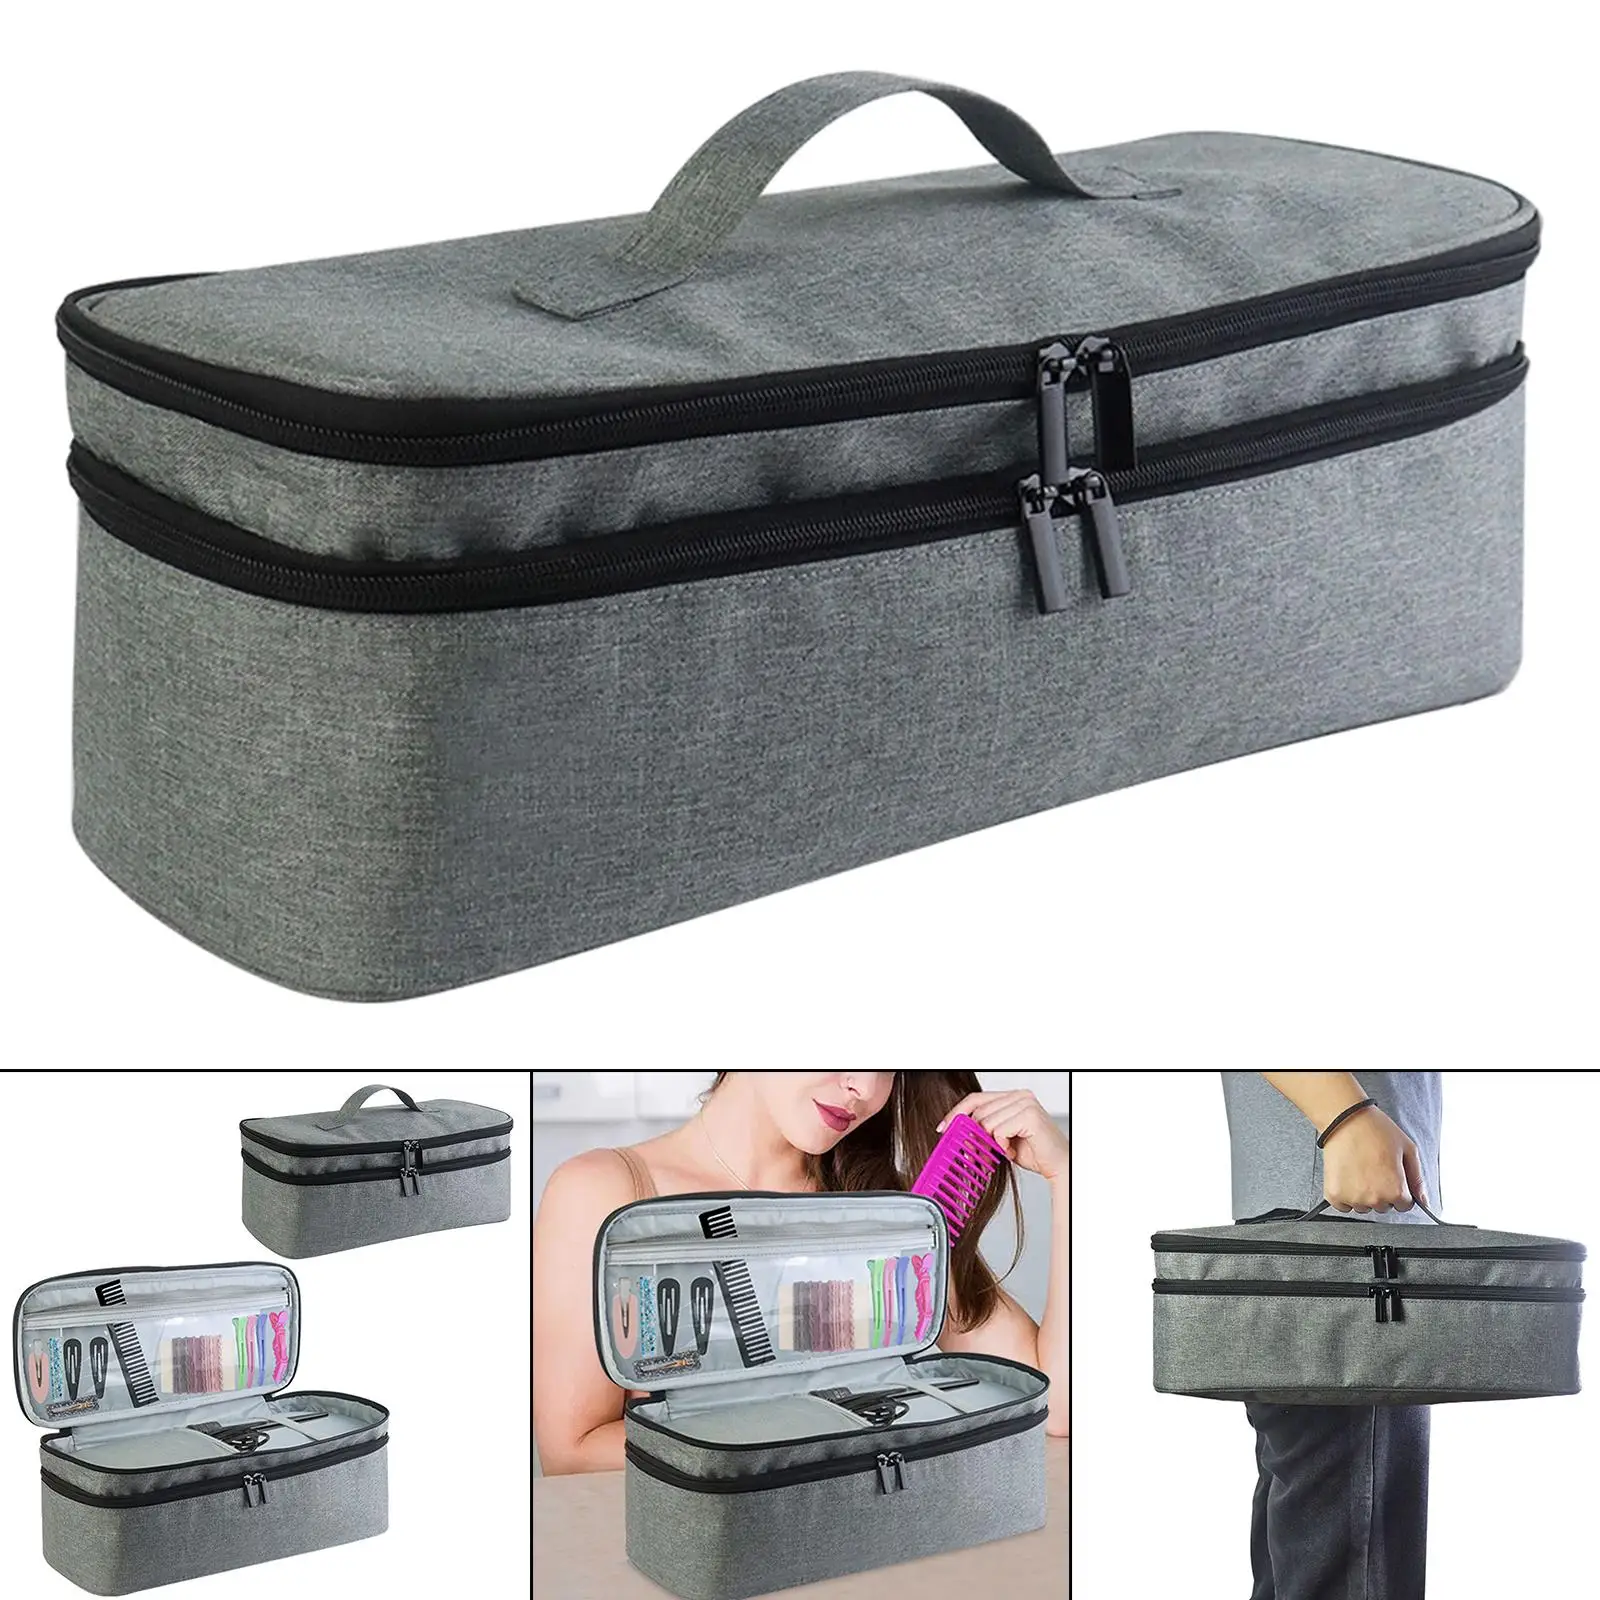 Double Layer Hair Dryer Storage Bag Large Makeup Case Dustproof Protection Bag with Handle for Business Trip Bathroom Home